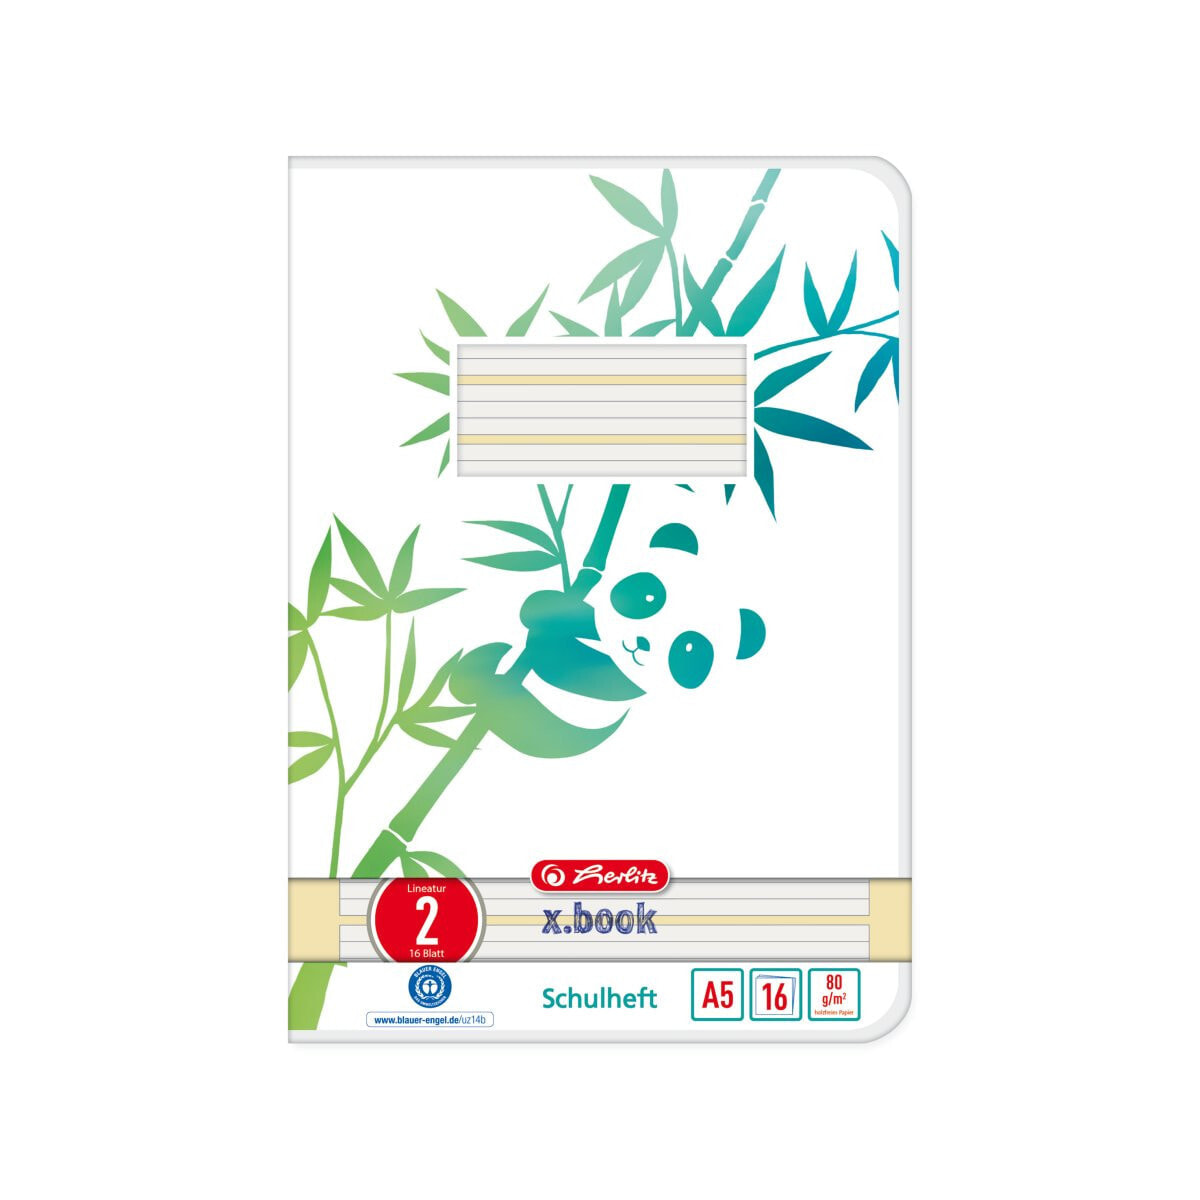 GREENline - Image - Green - White - A5 - 16 sheets - 80 g/m² - Lined paper